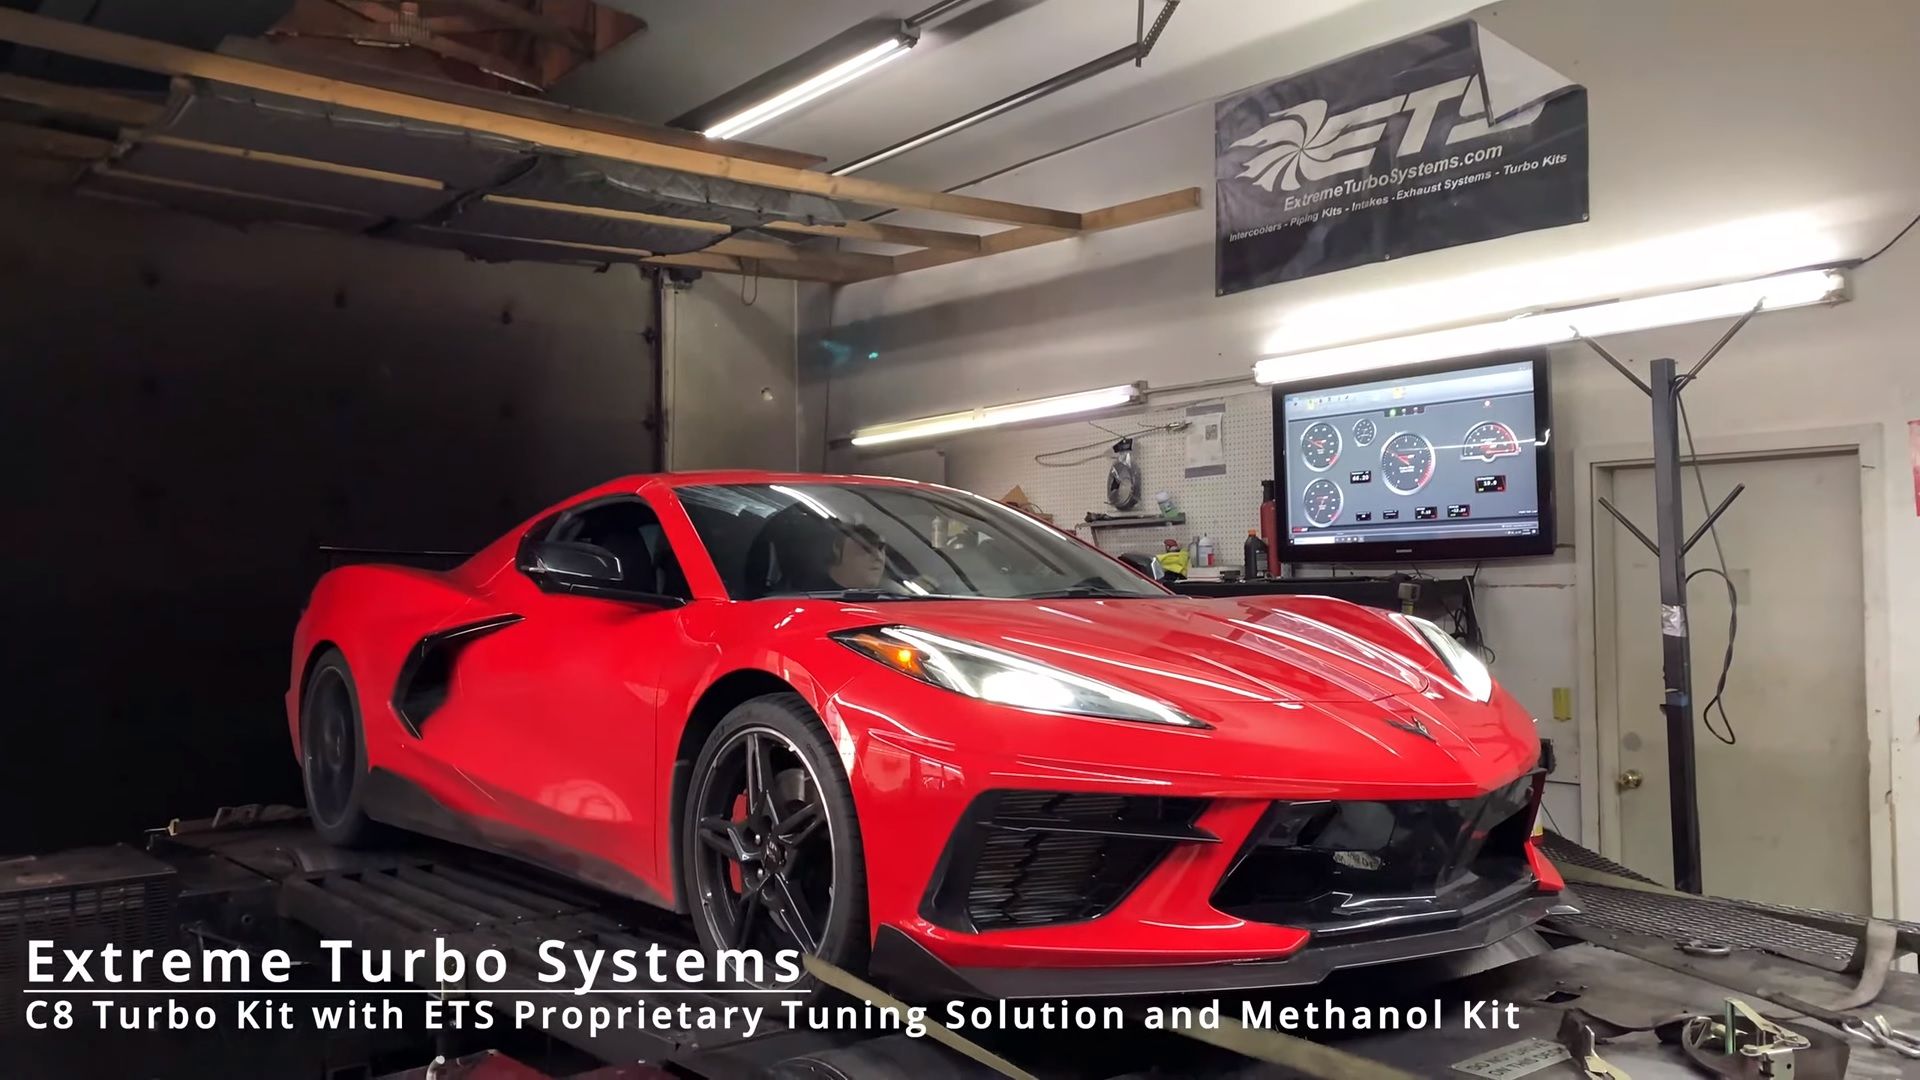 2020 Chevrolet C8 Corvette by Extreme Turbo Systems